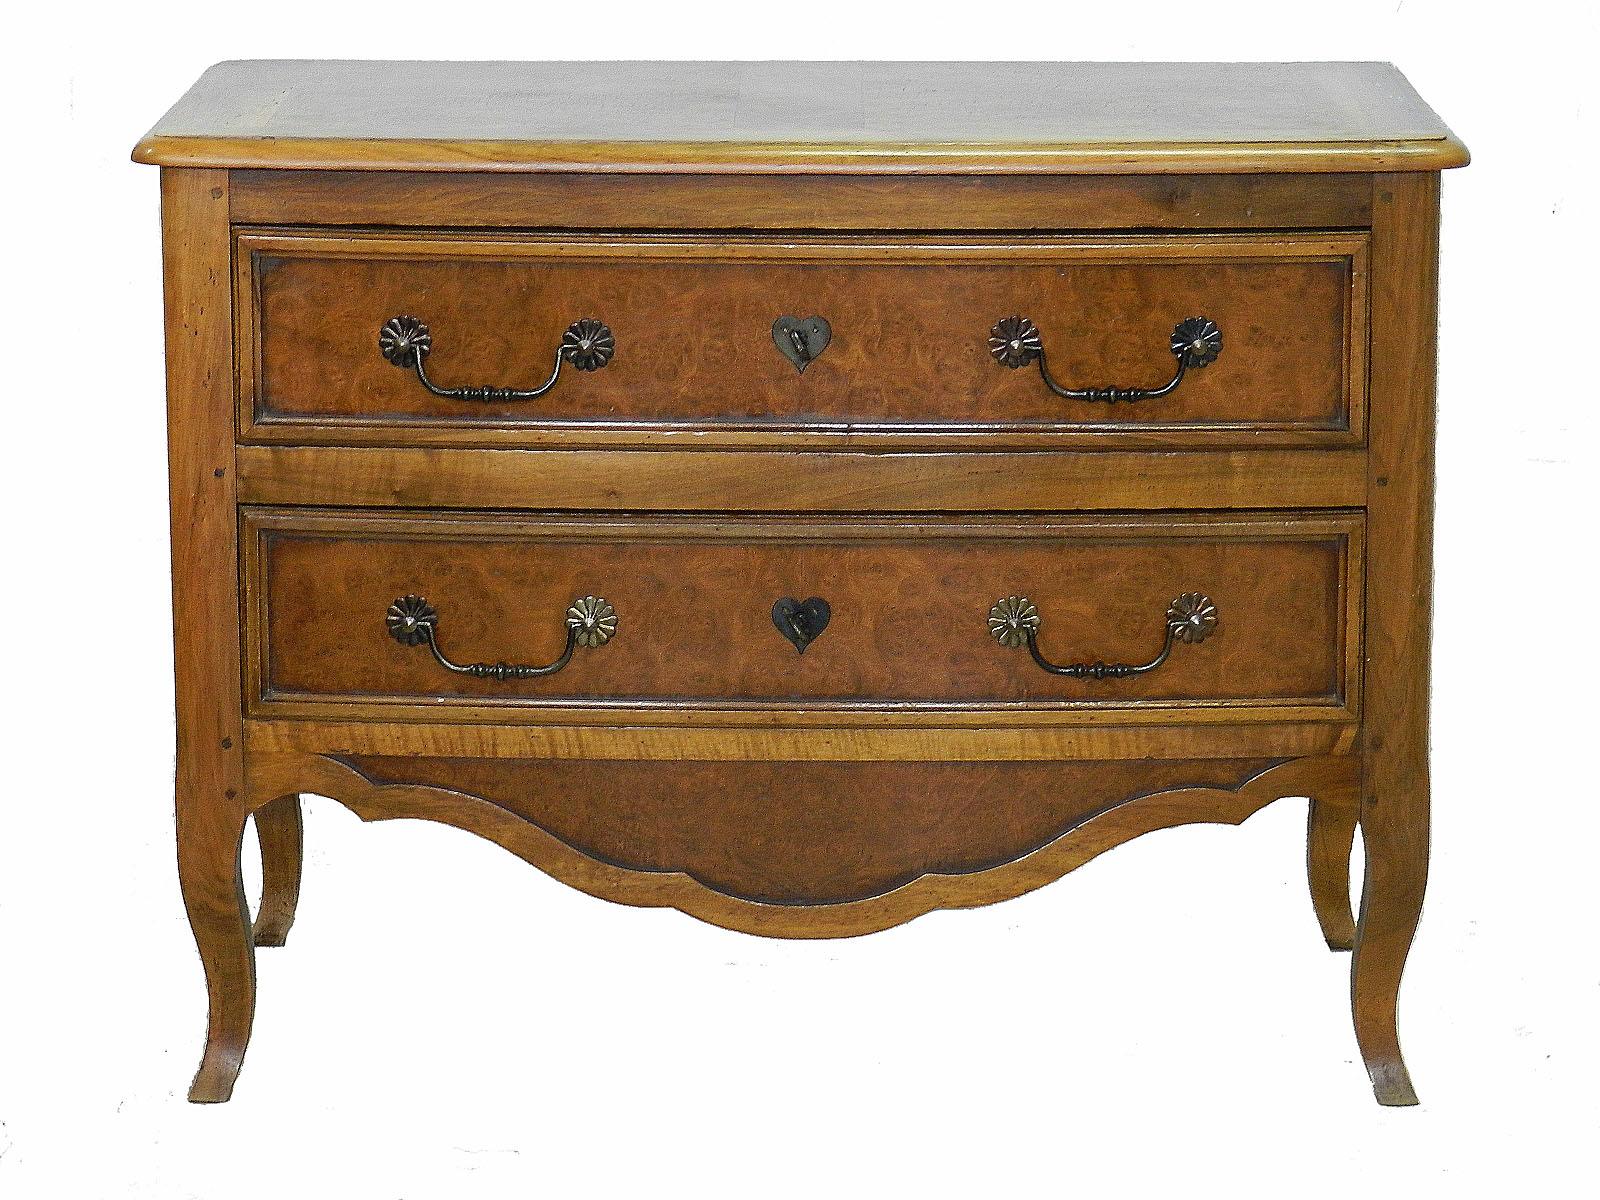 Commode French chest of drawers Louis XV style vintage 20th century
Artisan made
Superb quality pegged construction in burr elm and walnut
Antique revival
Apron front
Two drawers.

 